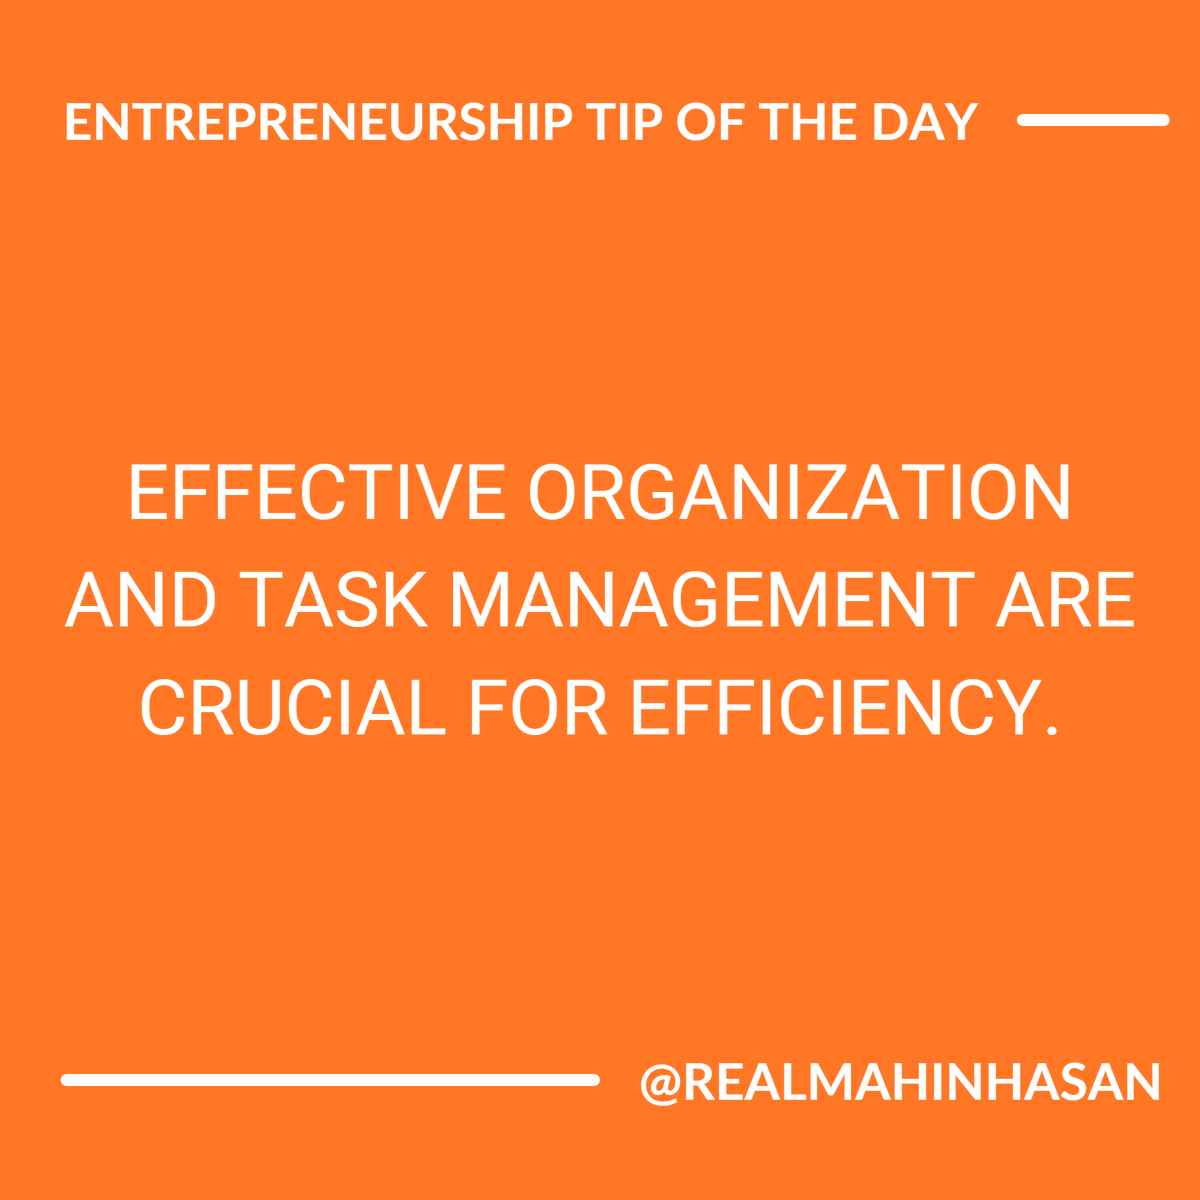 Stay organized and prioritize tasks for increased productivity. #OrganizationSkills #ProductivityBoost